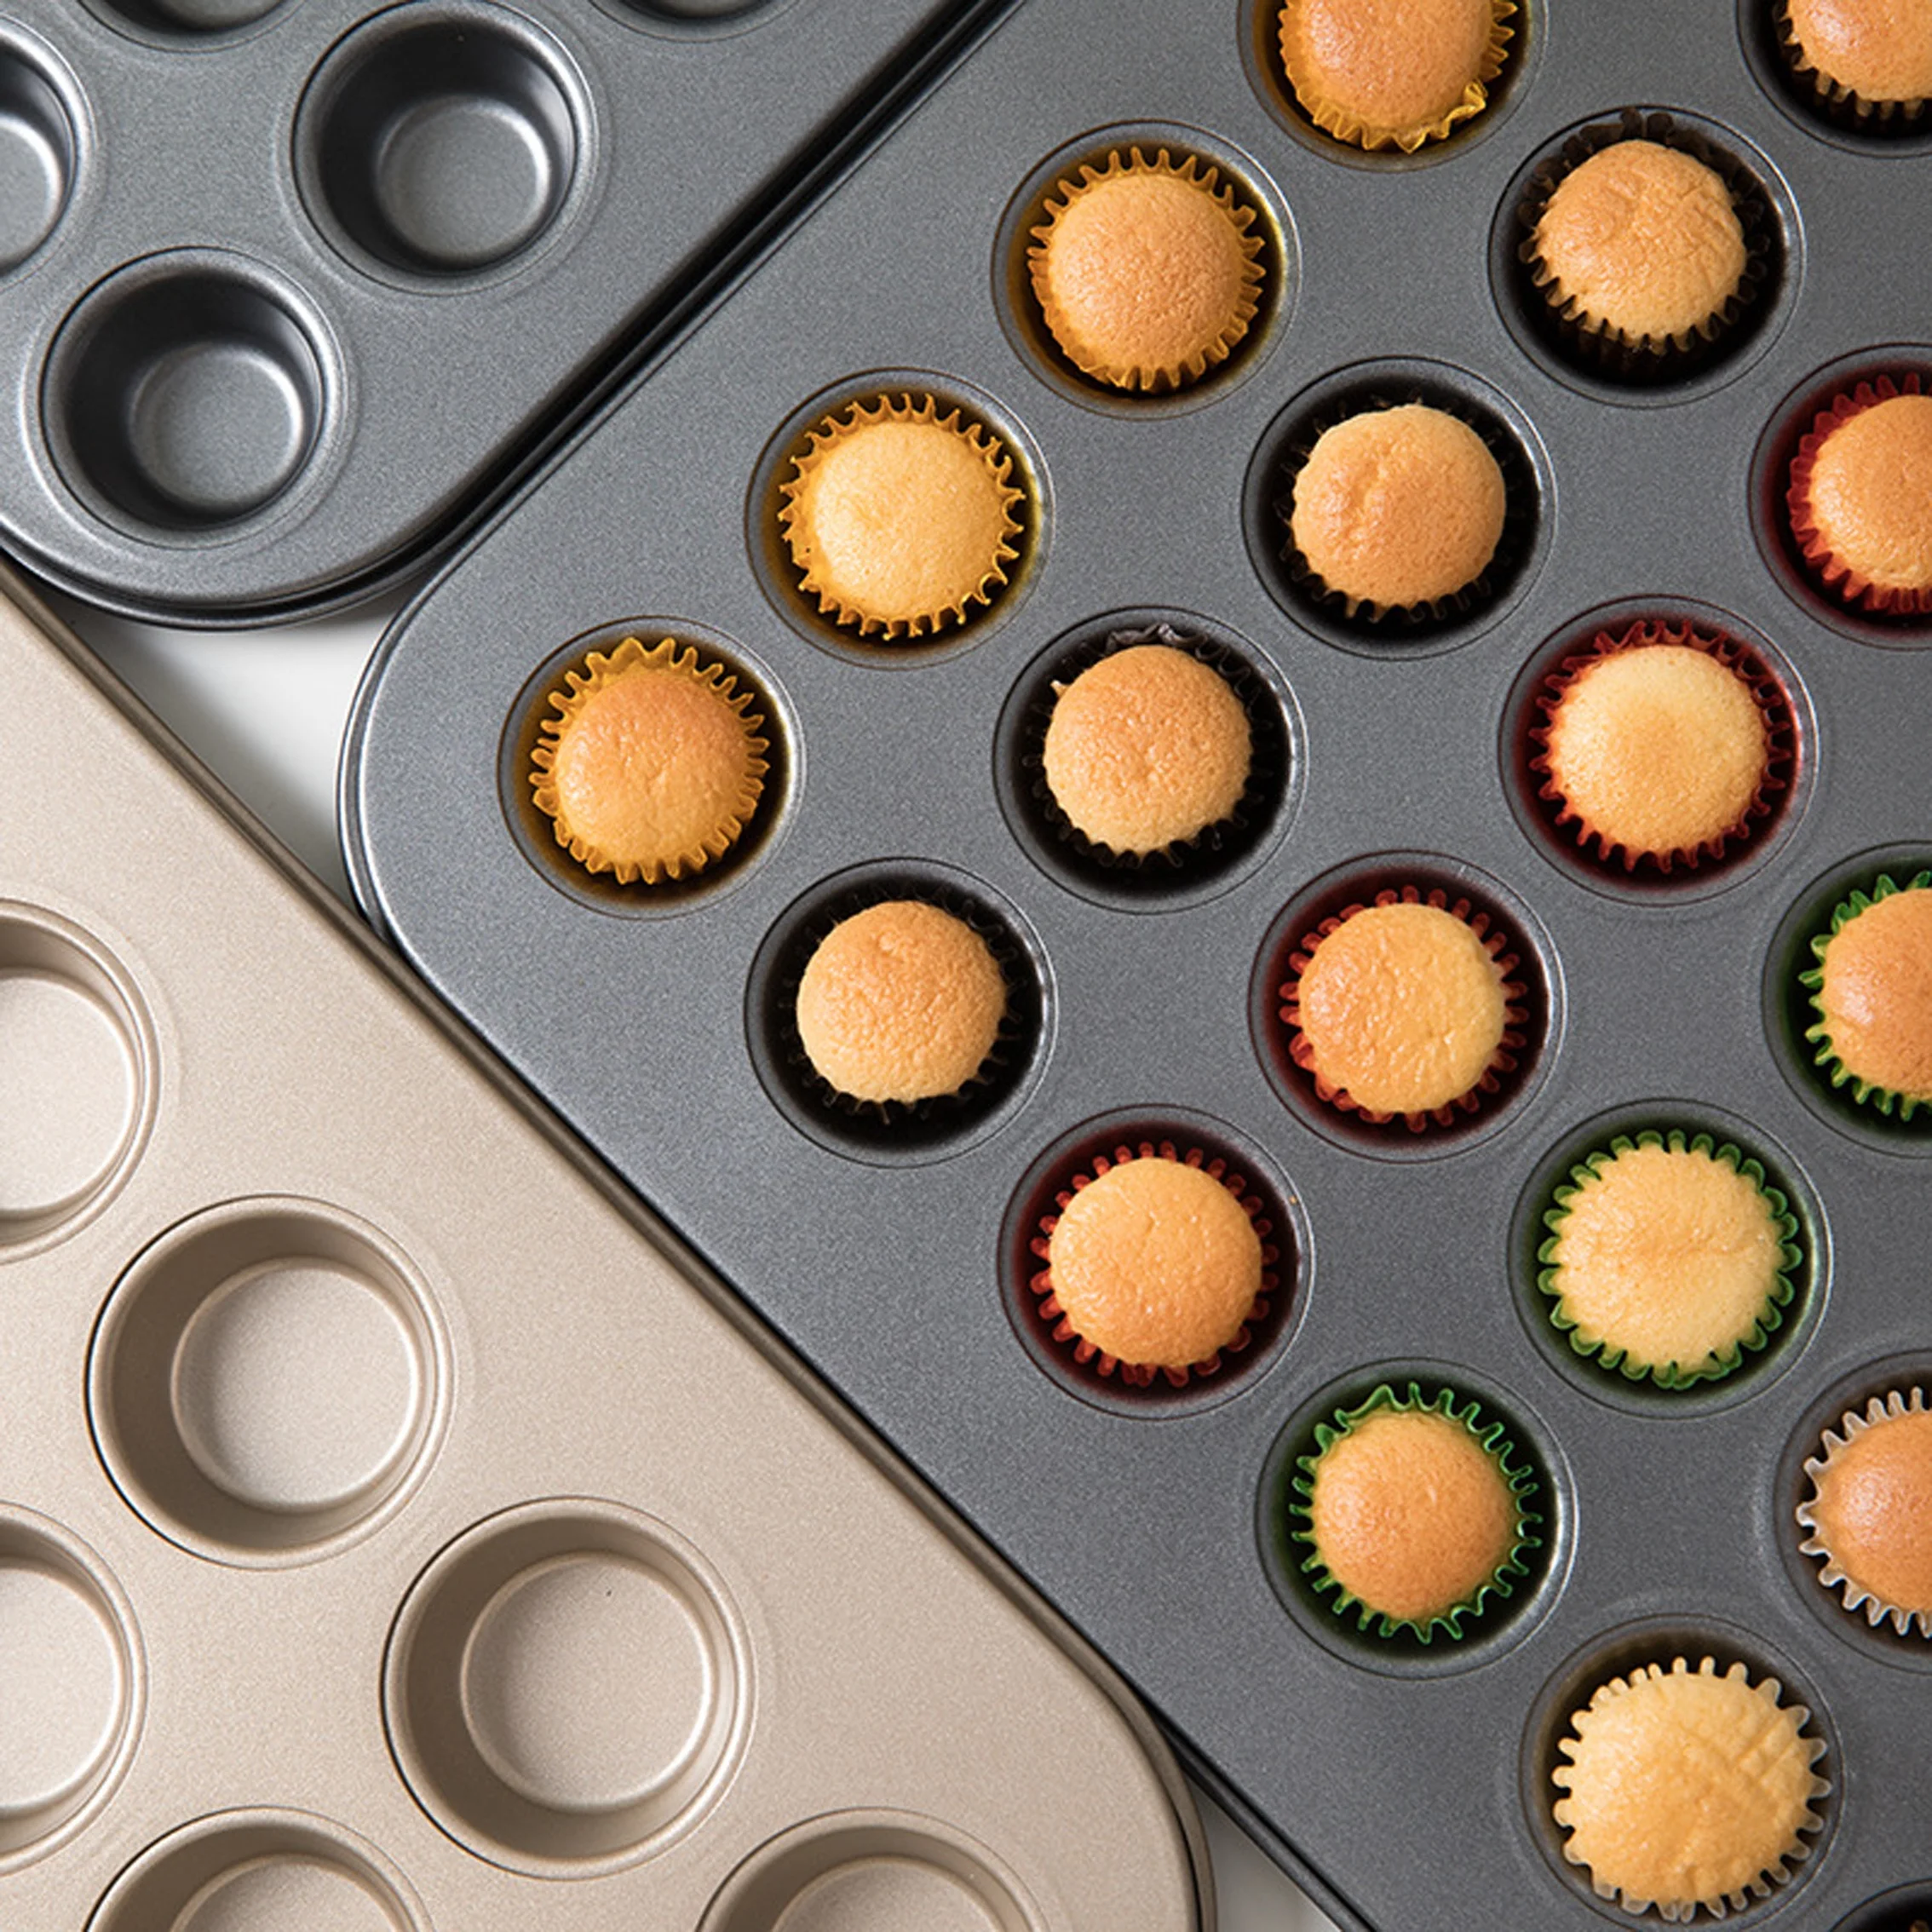 48 Cavity 24 holes Round Carbon Steel Mini Non Stick Muffin Cupcake Baking Tray Oven Baking Molds Aluminum alloy cake molds